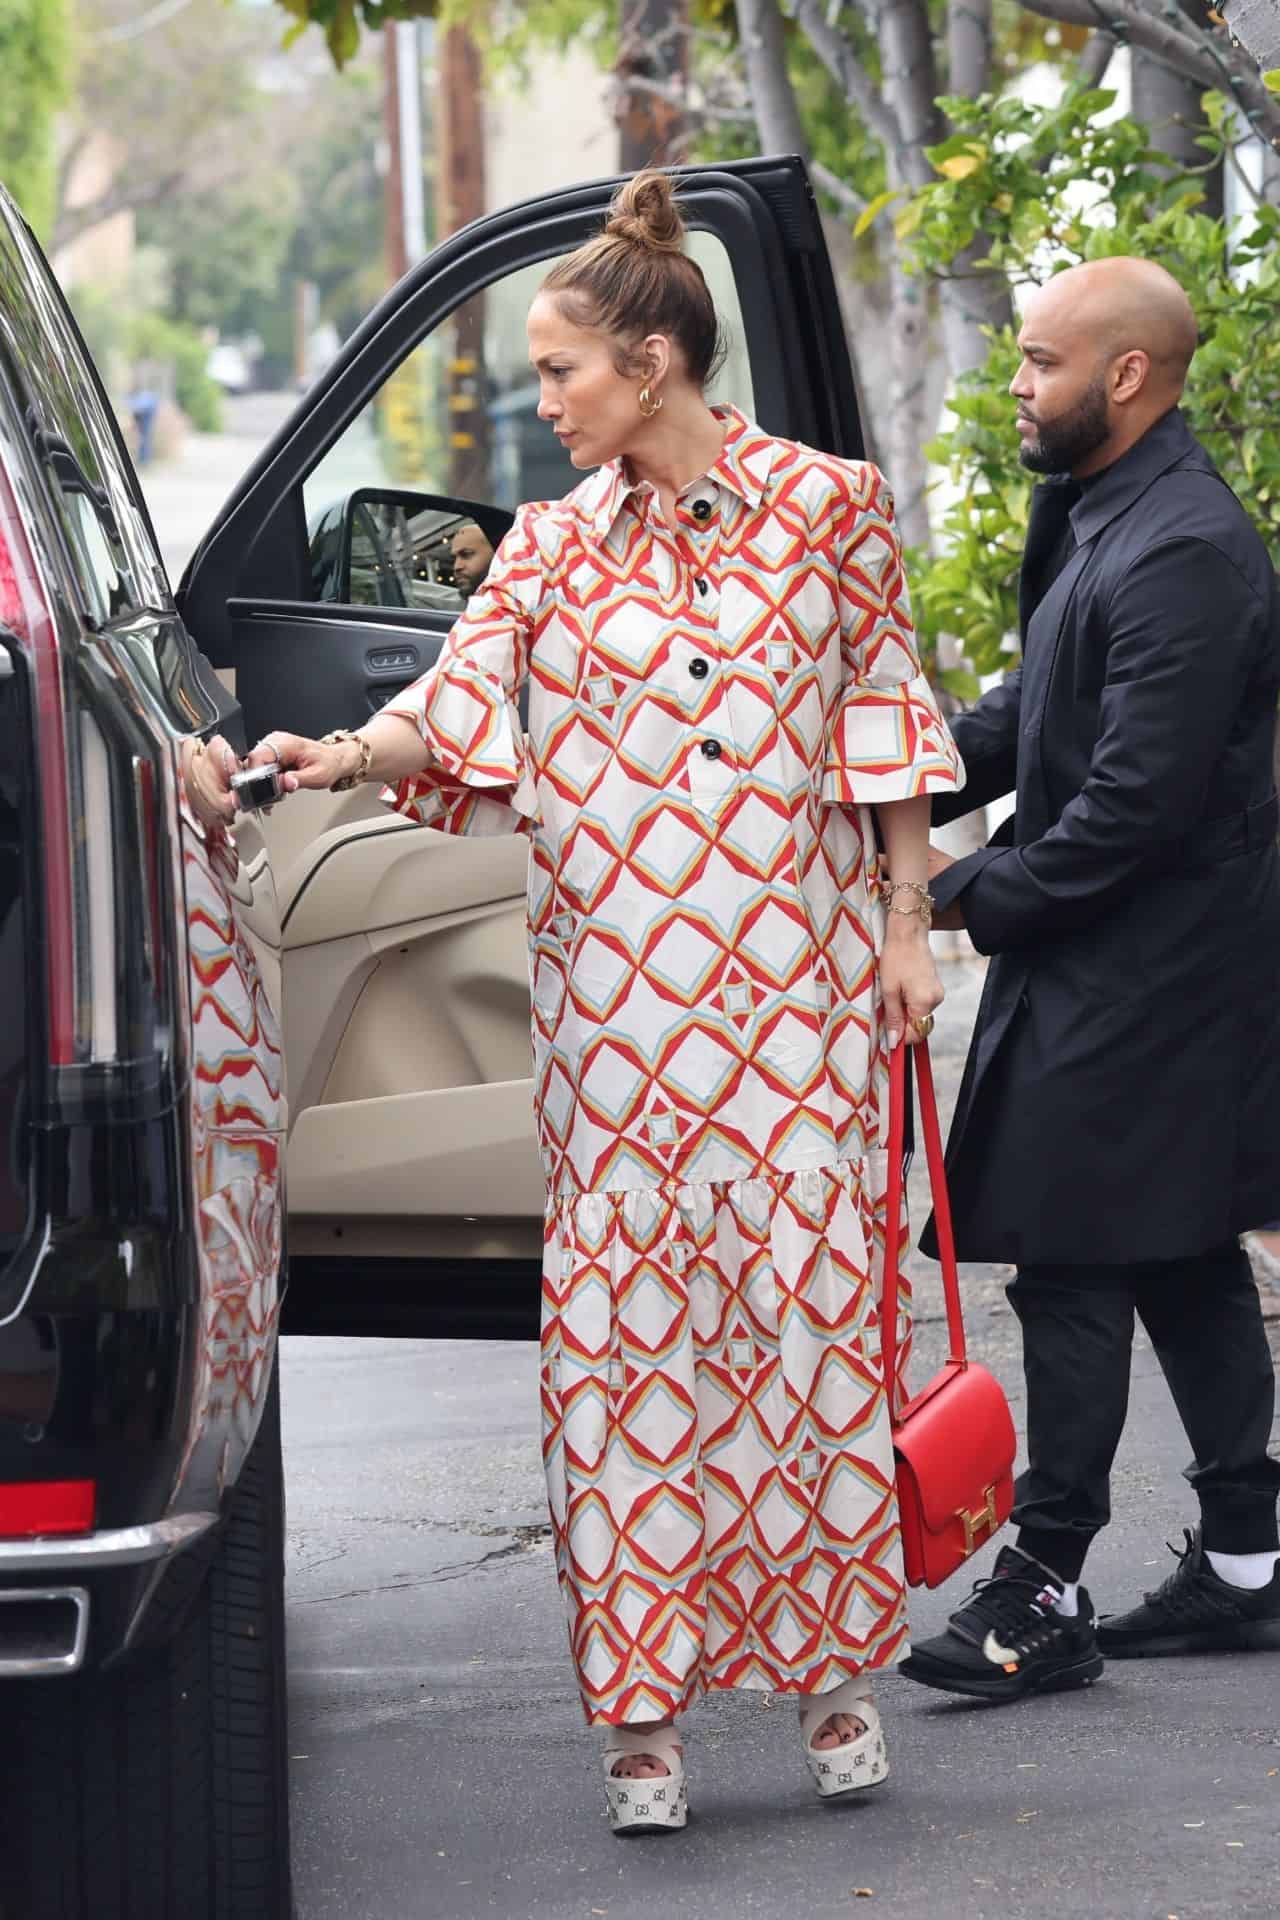 Jennifer Lopez Grabs Attention with a Vibrant and Stylish Outfit in LA